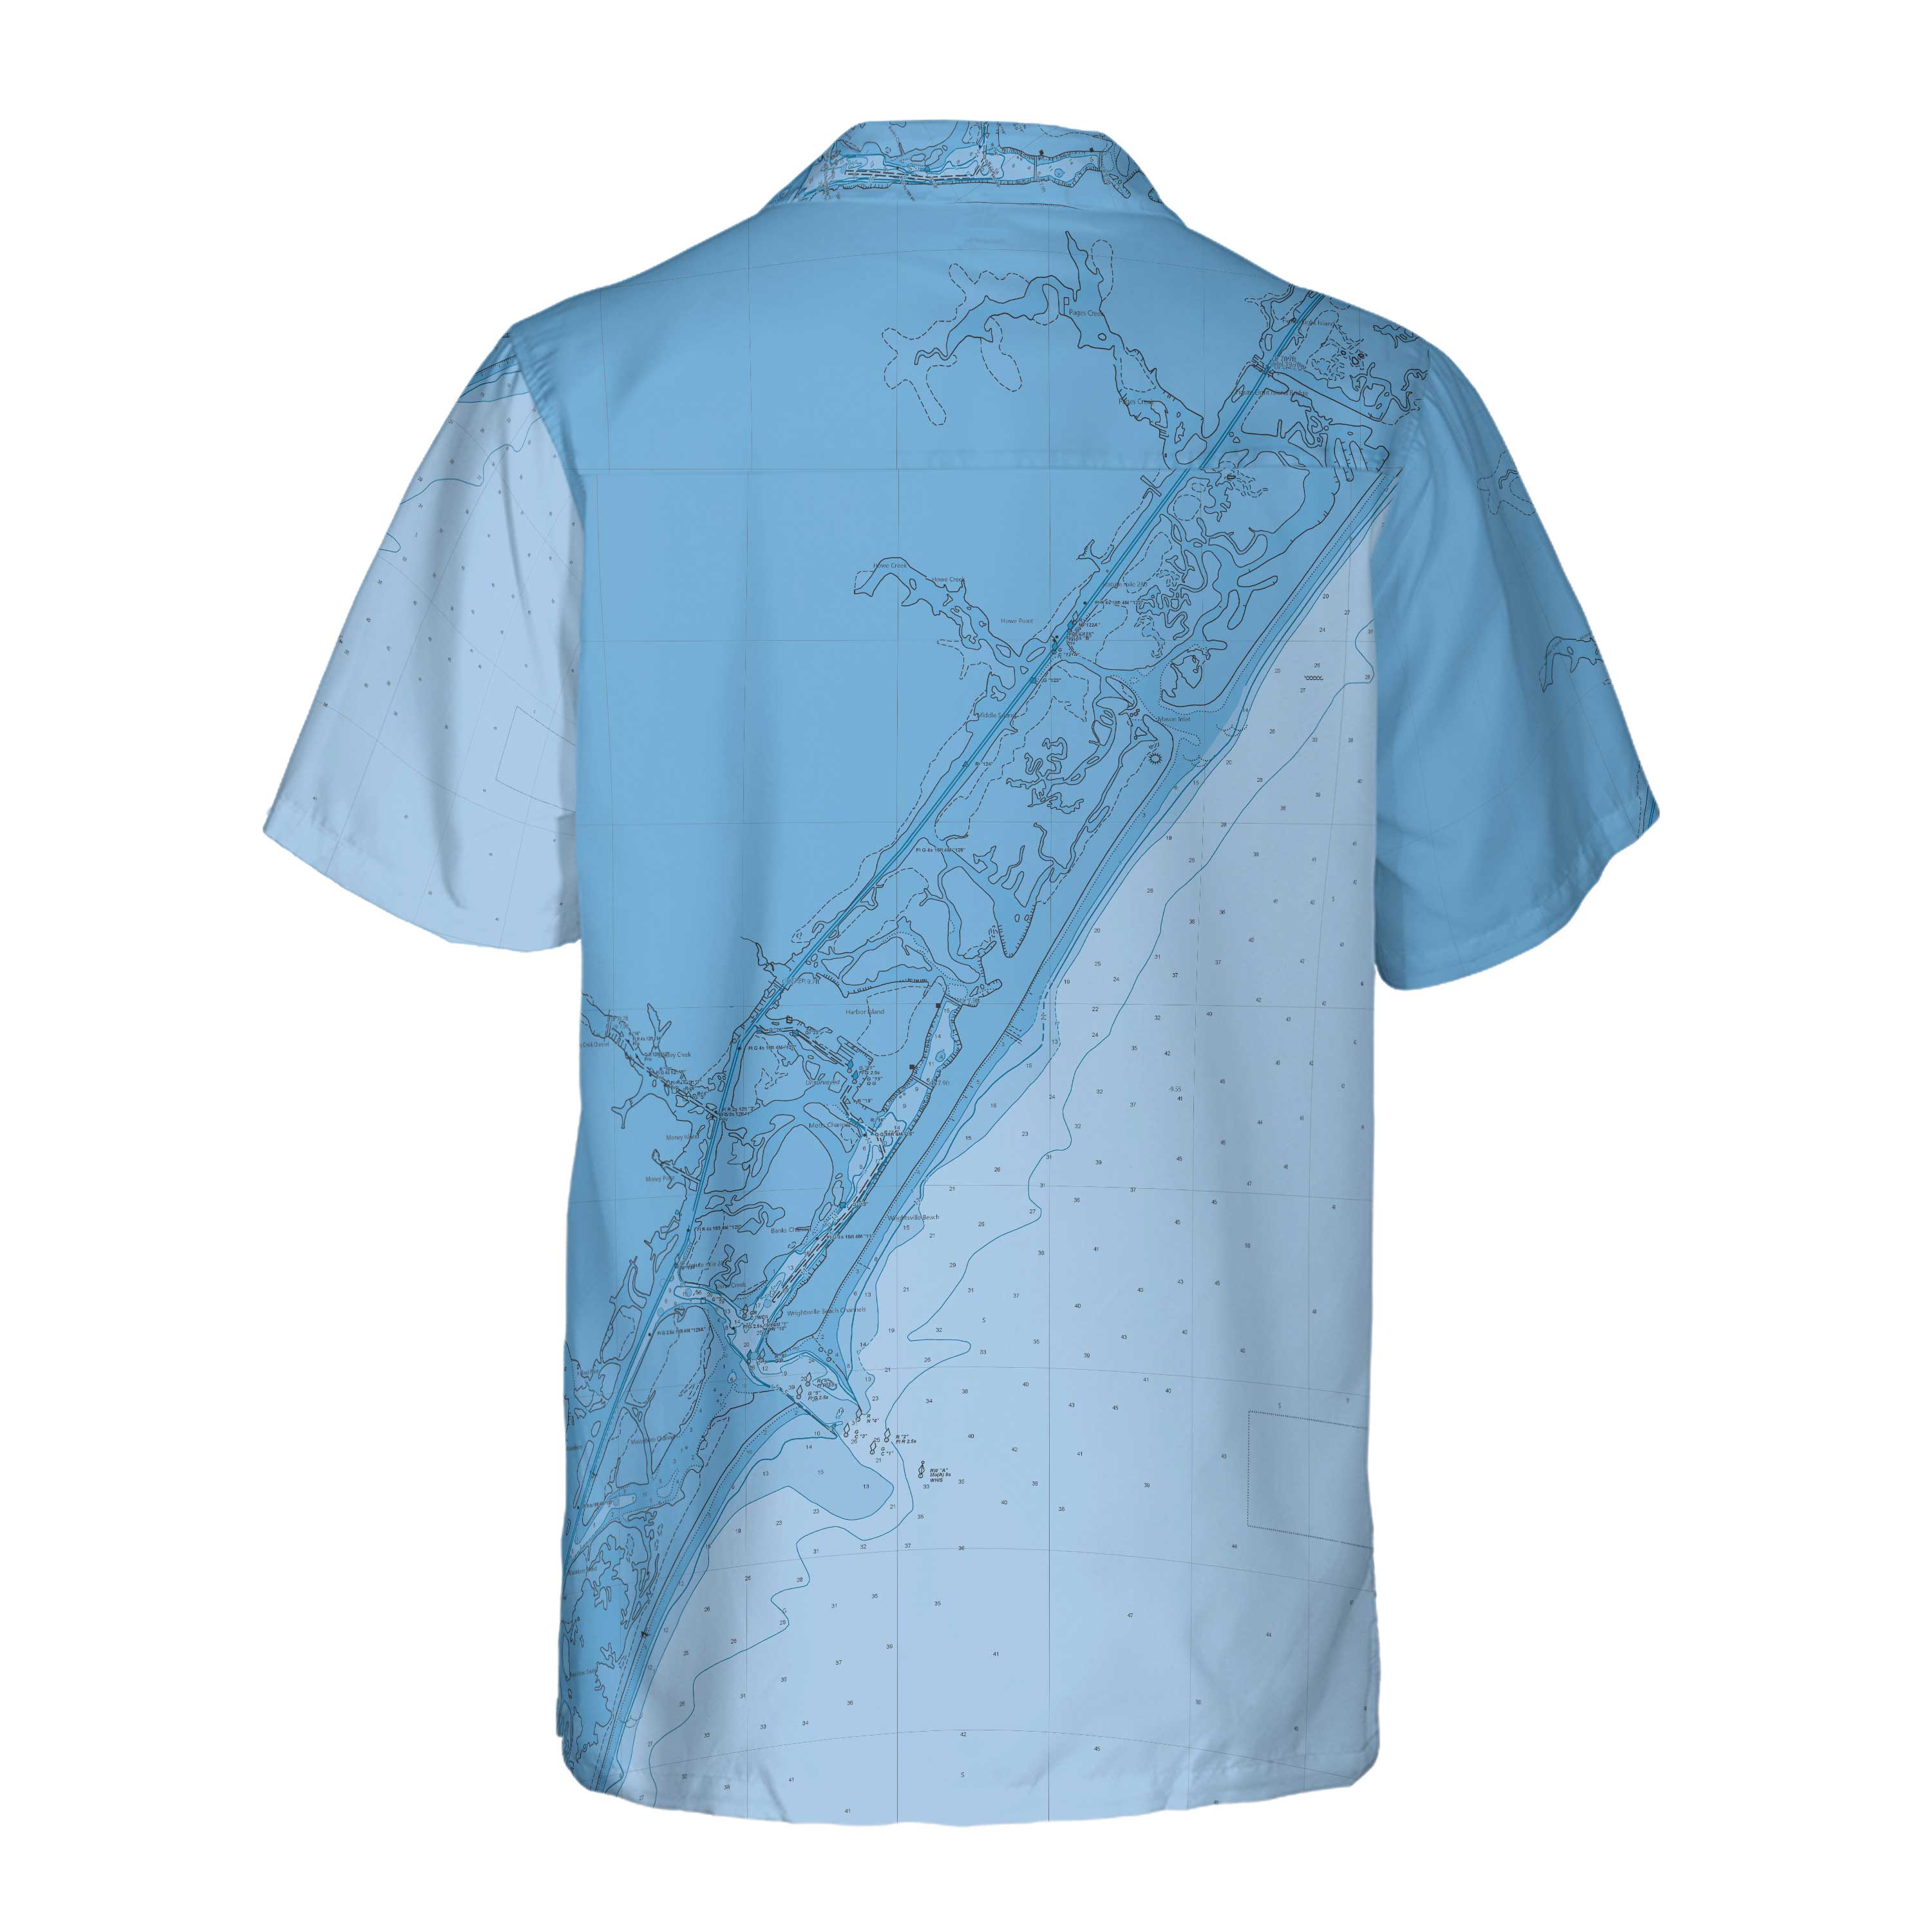 The Wrightsville Beach Blues Coconut Button Camp Shirt